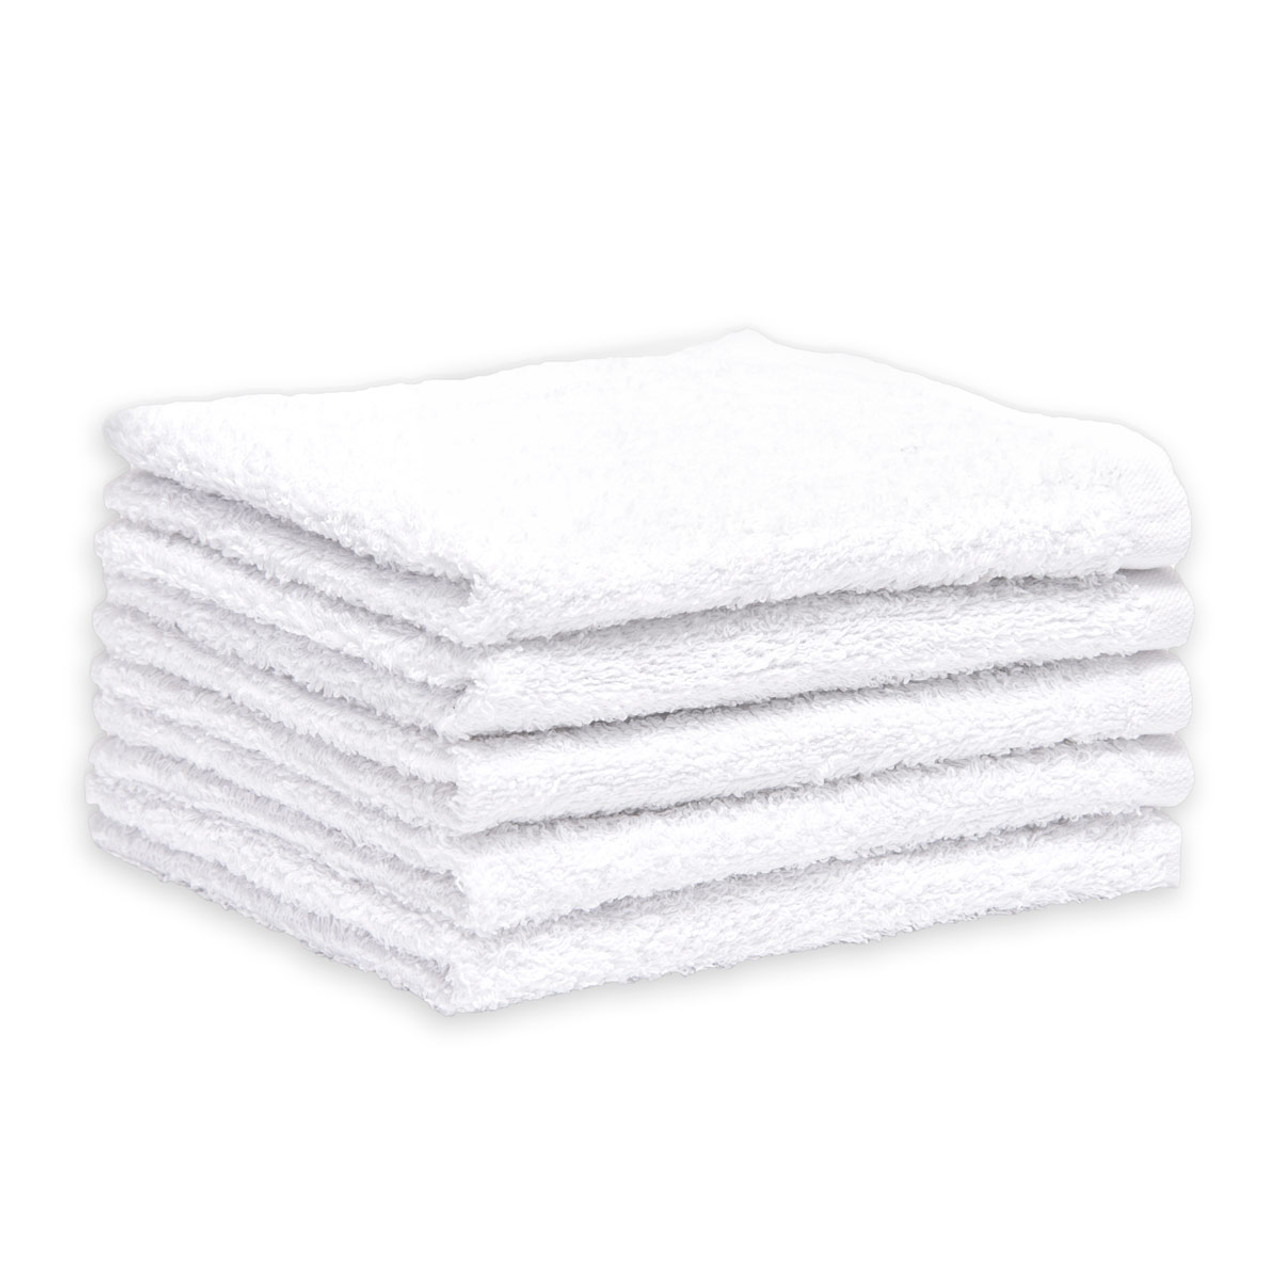 Bar Towels Heavyweight Cotton Terry 14x16 White